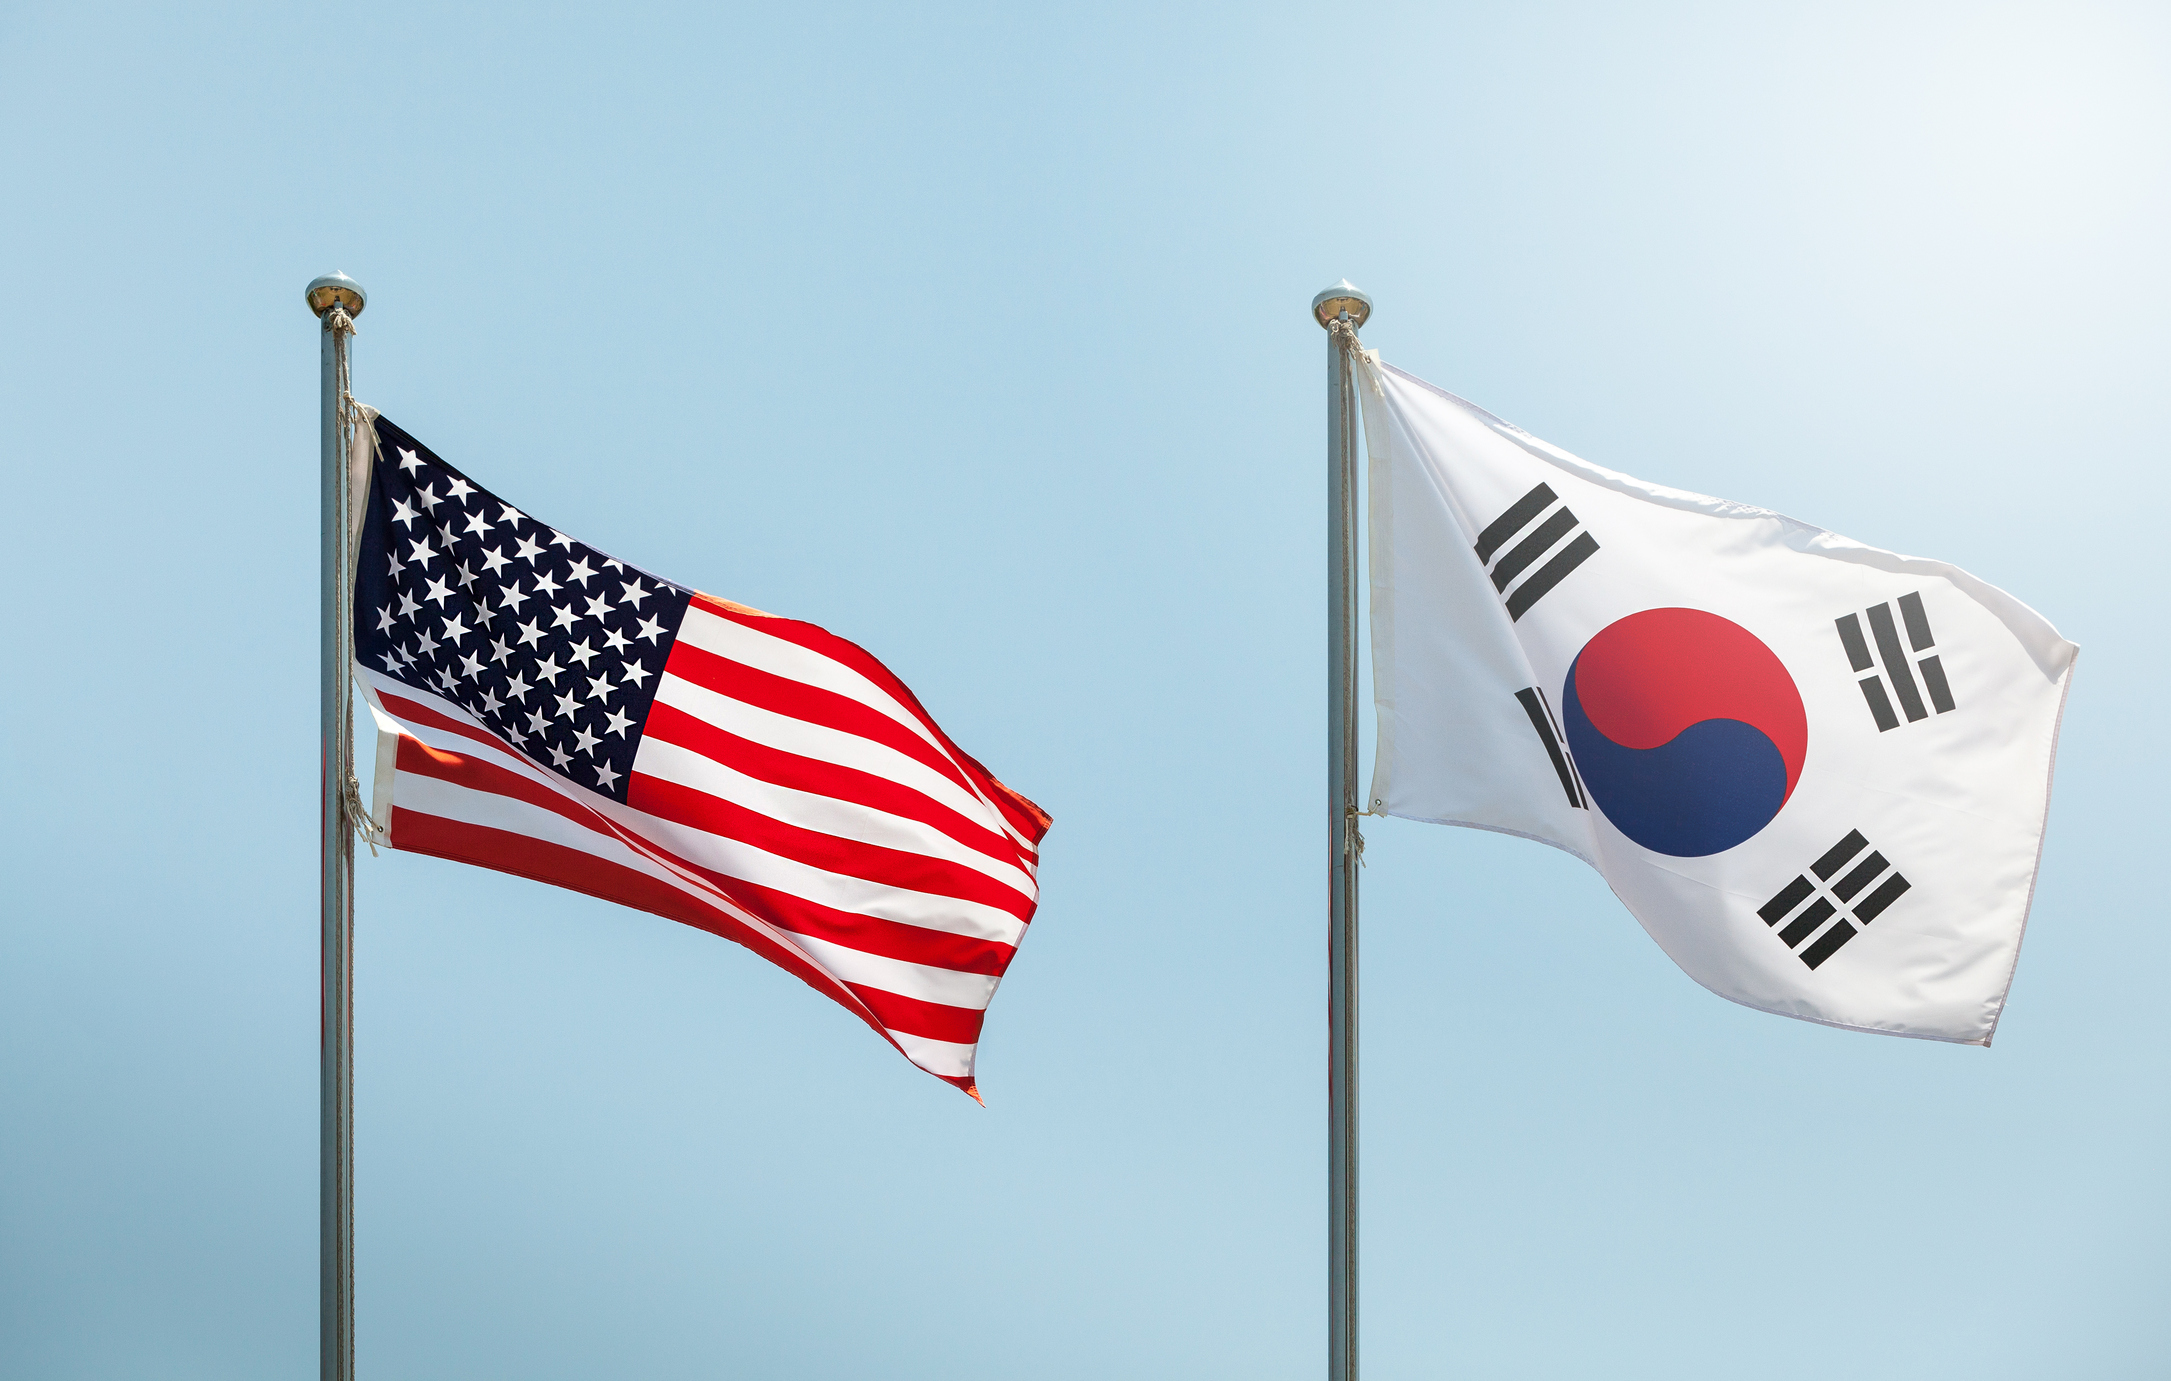 The US flag flies next to the South Korean flag (ByoungJoo/Getty Images)